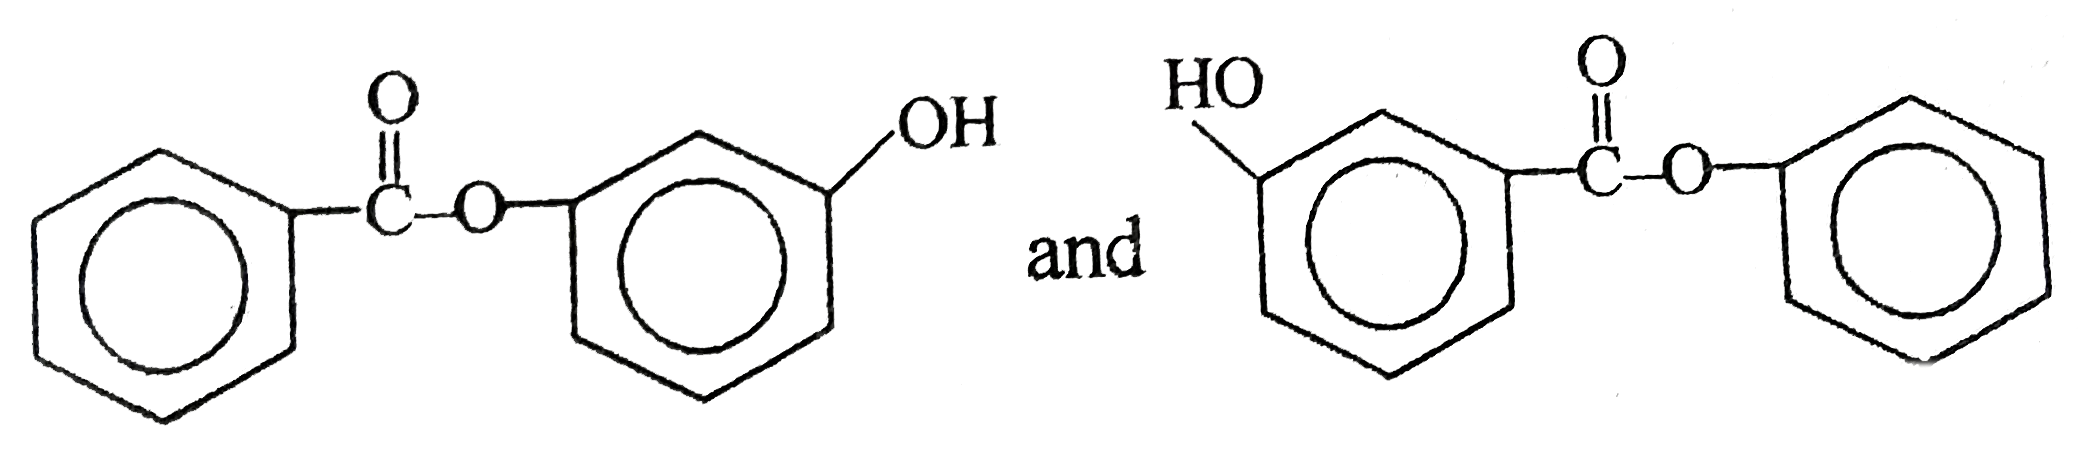 express which type of isomers